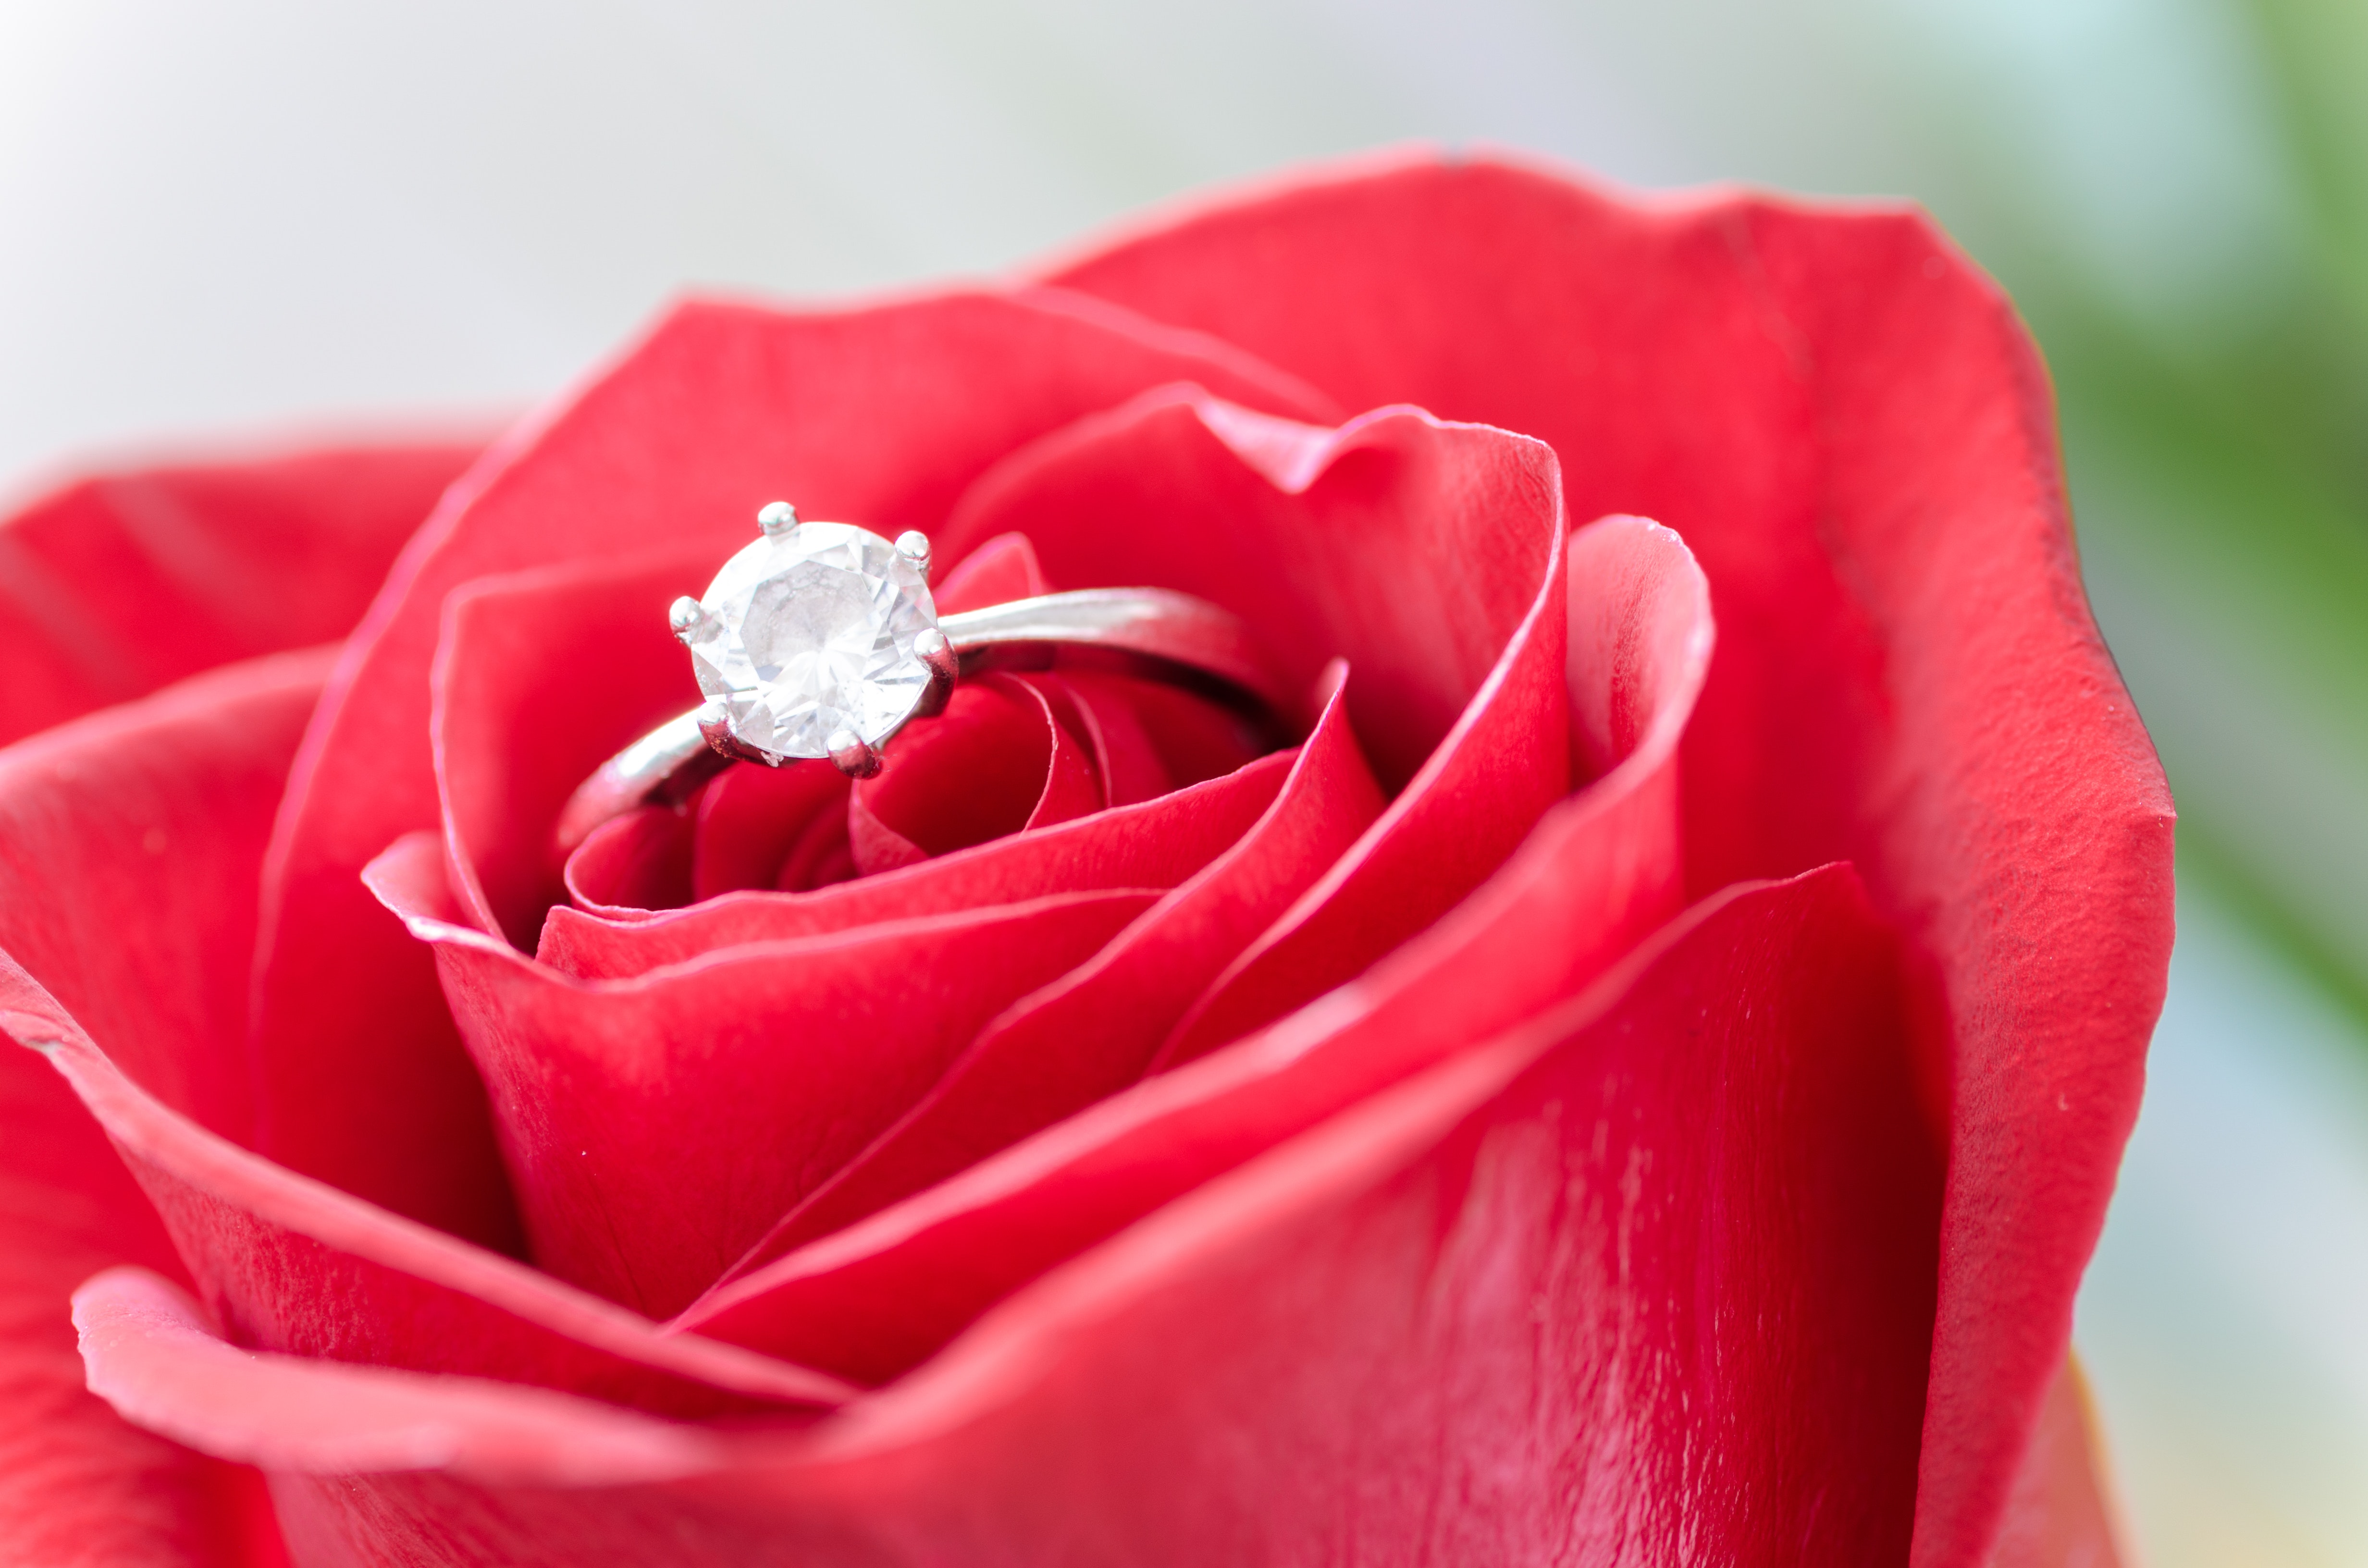 Silver Diamond Embed Ring on Red Rose, Affection, Love, Macro, Marriage, HQ Photo